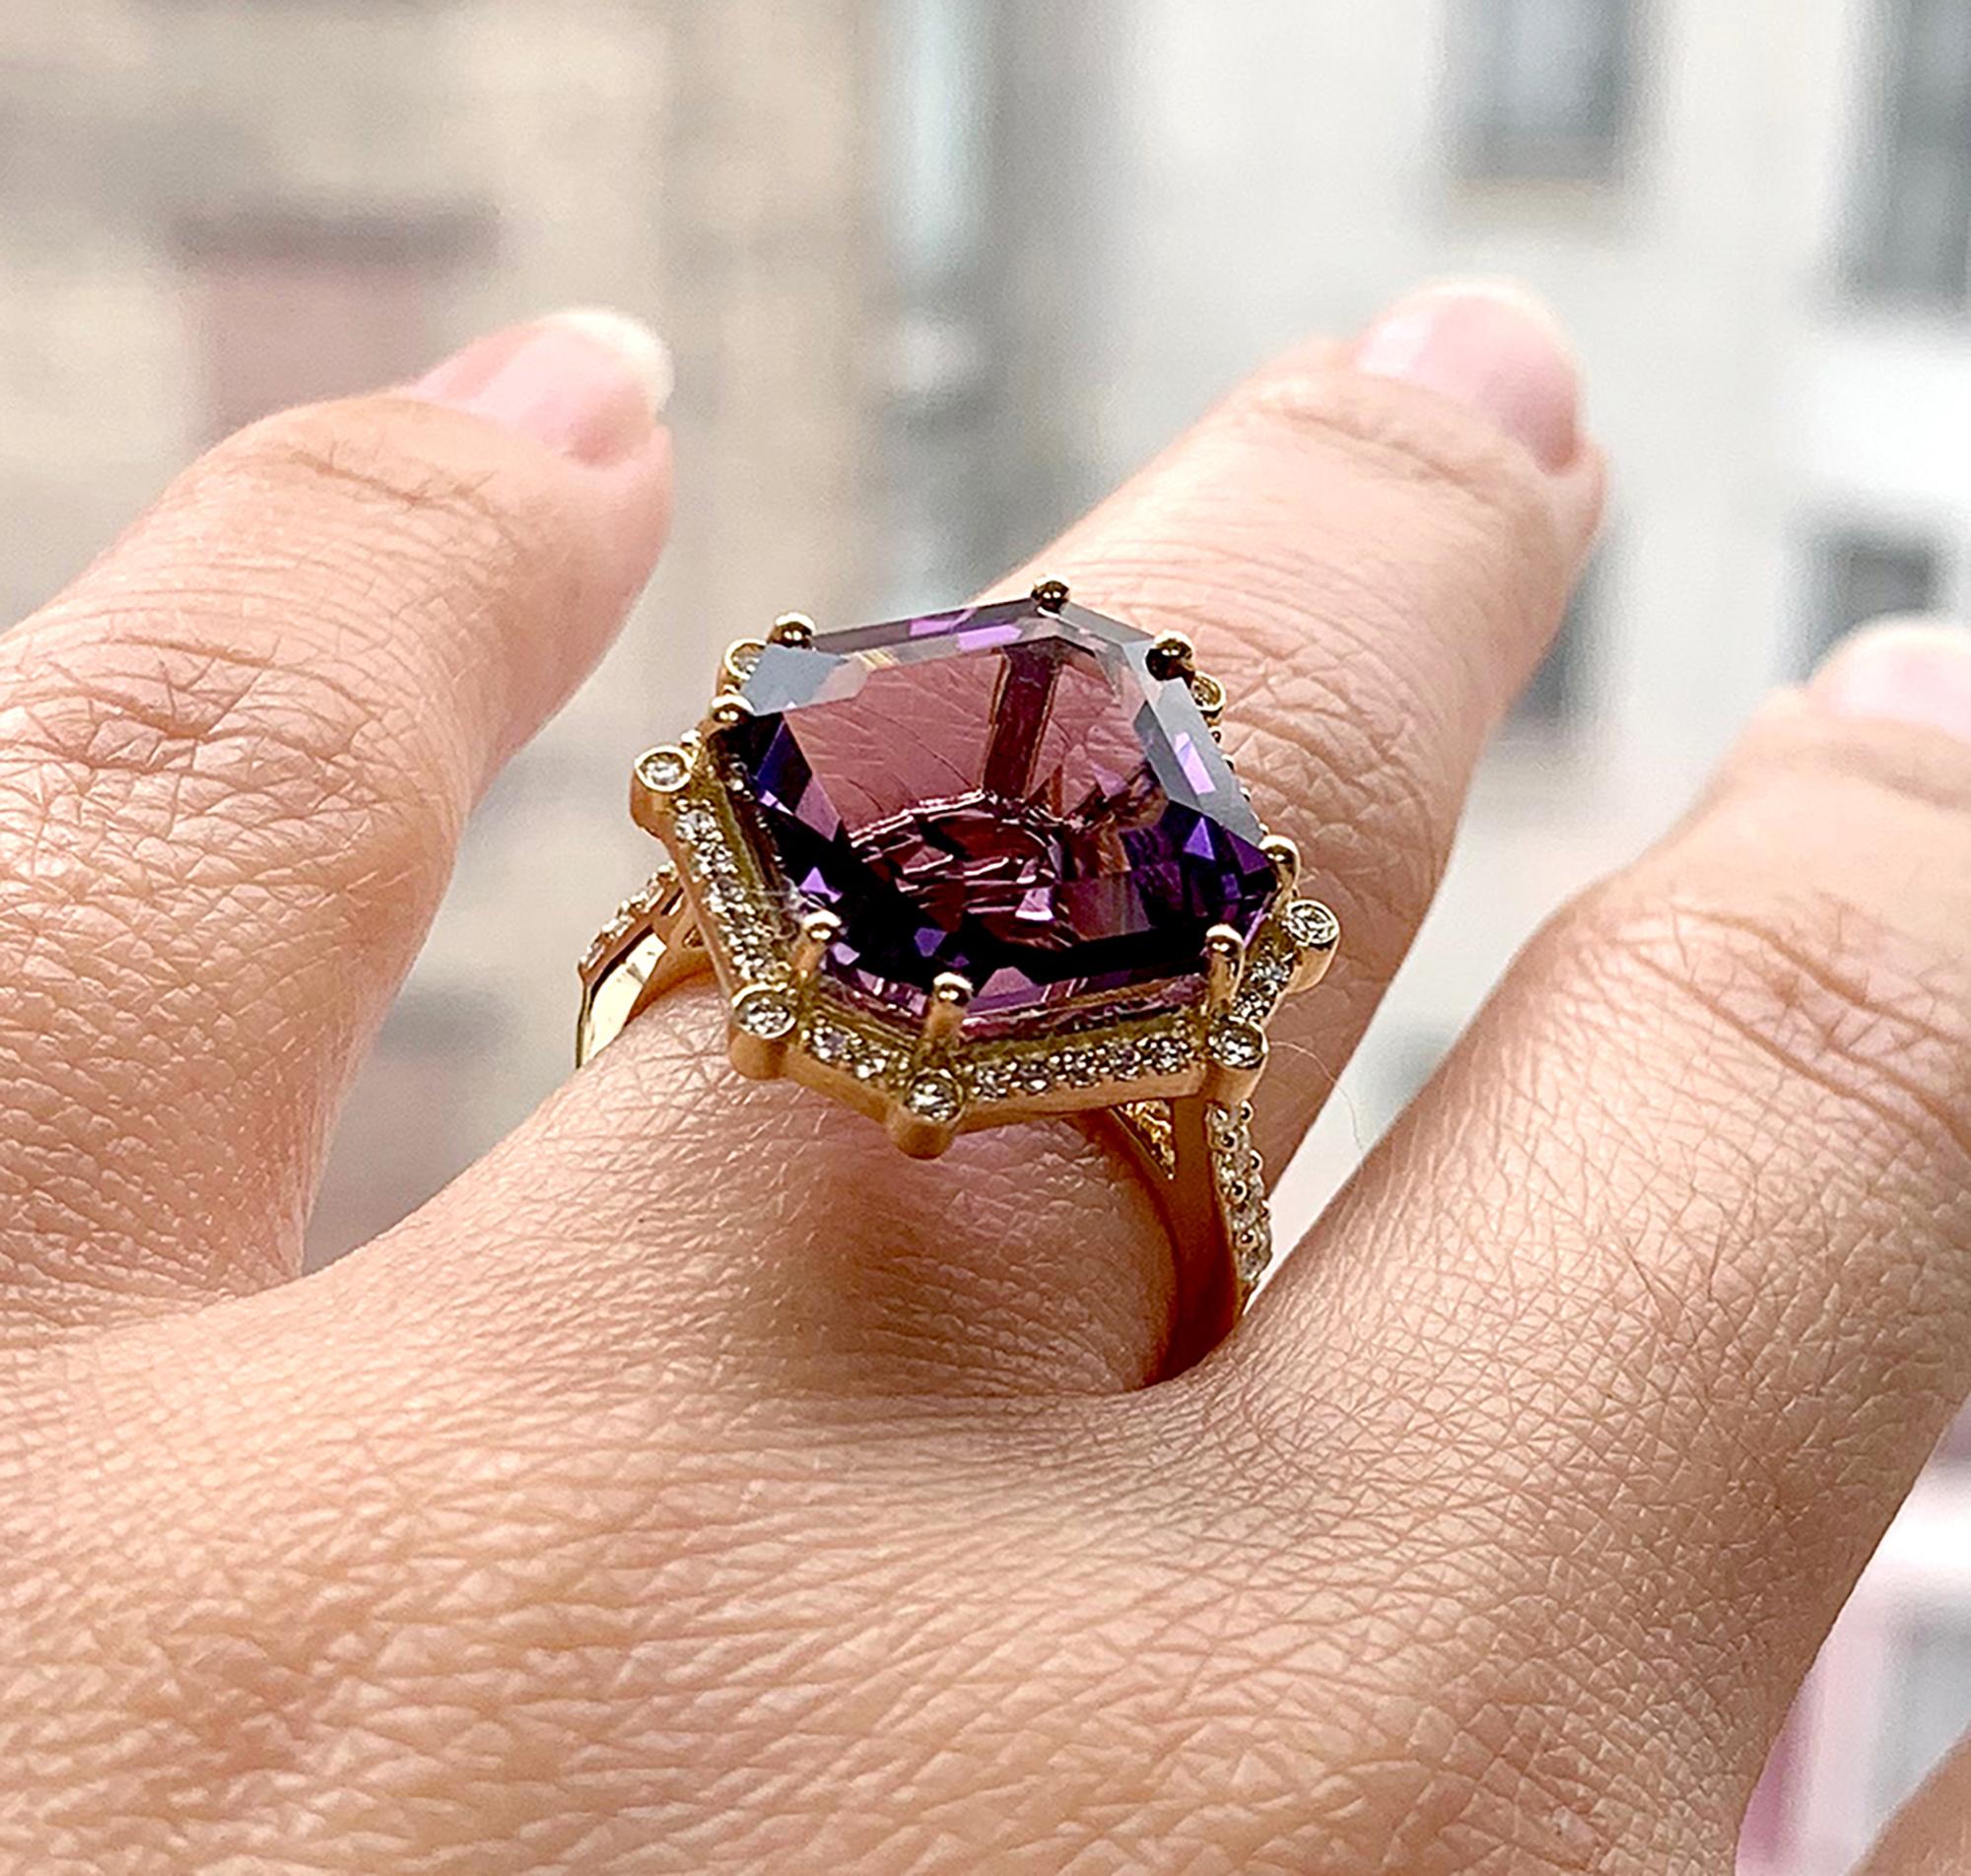 Amethyst Emerald Cut Asscher Ring in 18K Yellow Gold with Diamonds, from 'Gossip' Collection.
Please allow 4-5 weeks for this item to be delivered.

Stone Size: 12 x 12 mm 

Gemstone Approx Wt: Amethyst- 7.43 Carats

Diamonds: G-H / VS; Approx. Wt.: